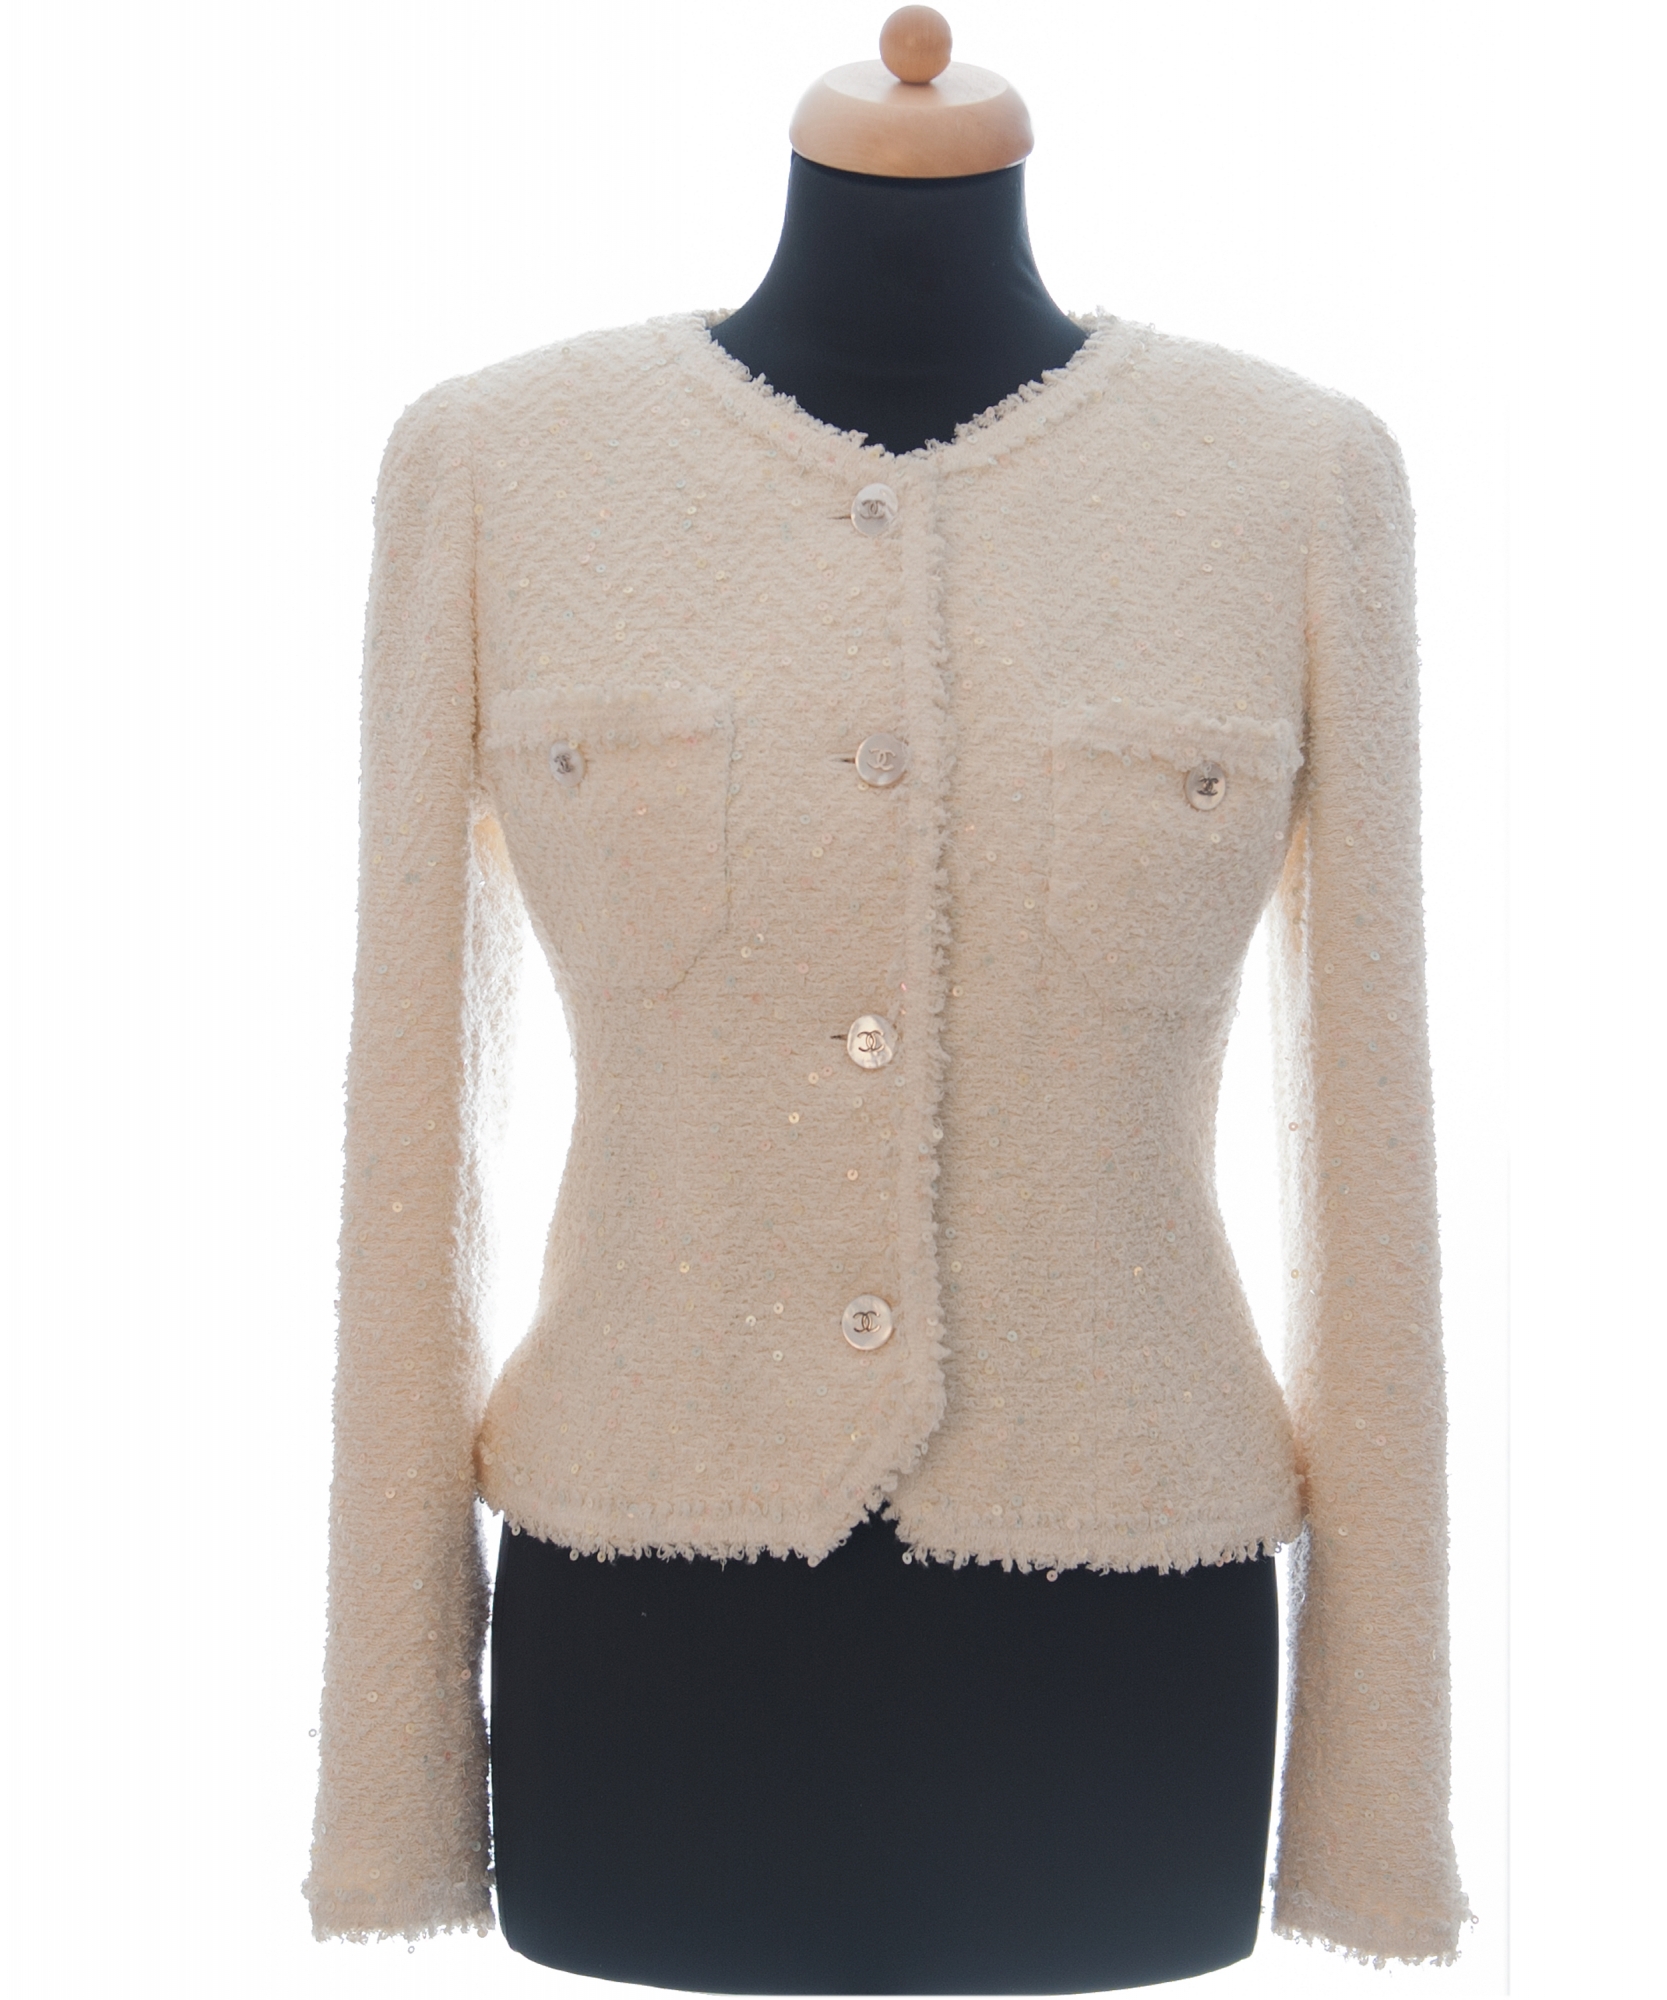 Chanel Ivory Bouclé Tweed Sequins Jacket 97P - Chanel